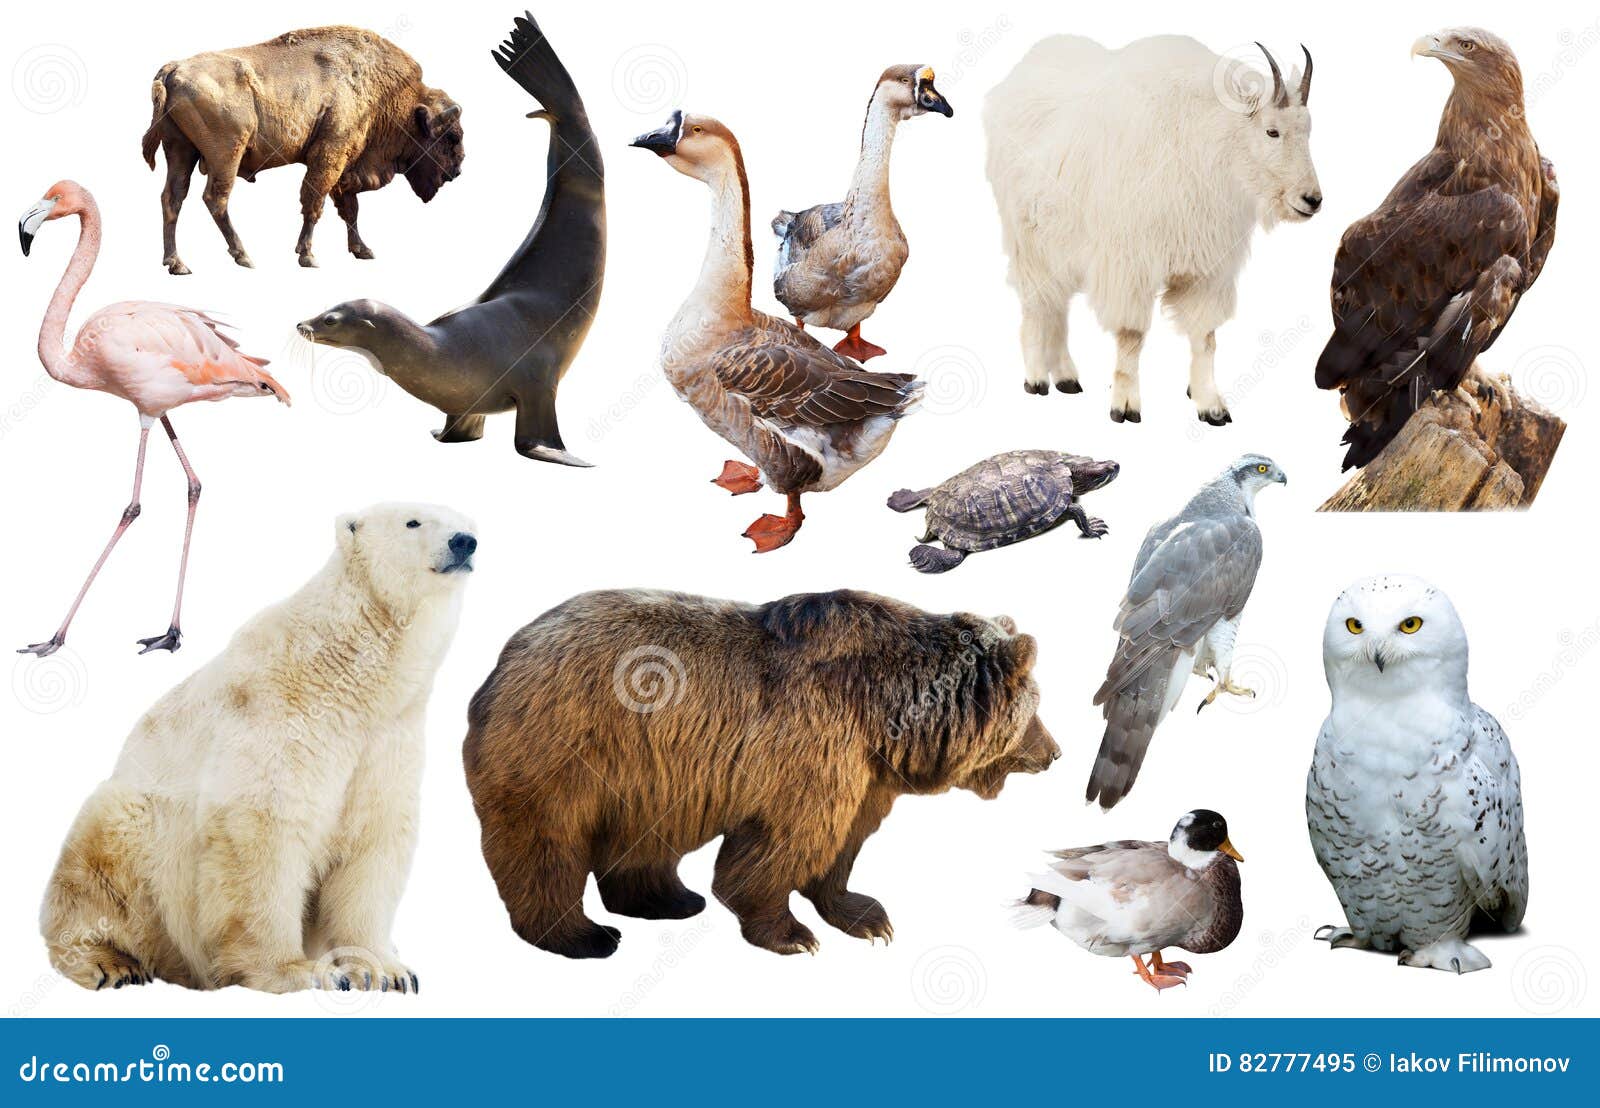 North American Animals Isolated Stock Image - Image of north, goat: 82777495